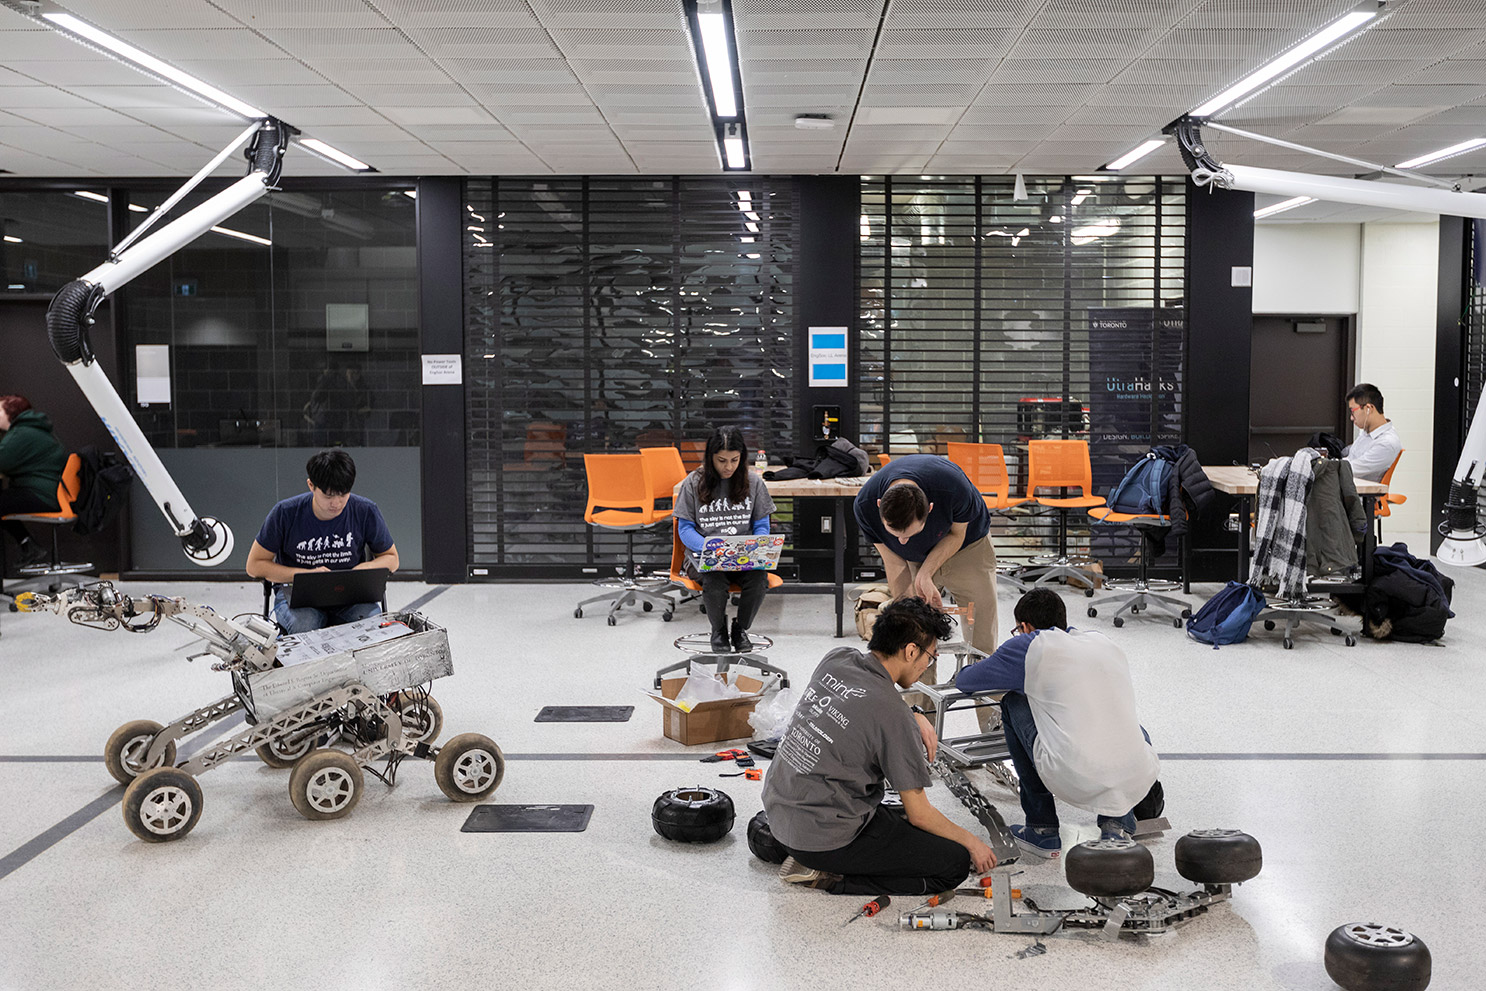 Engineering students building vehicles in the Engineering Society Arena